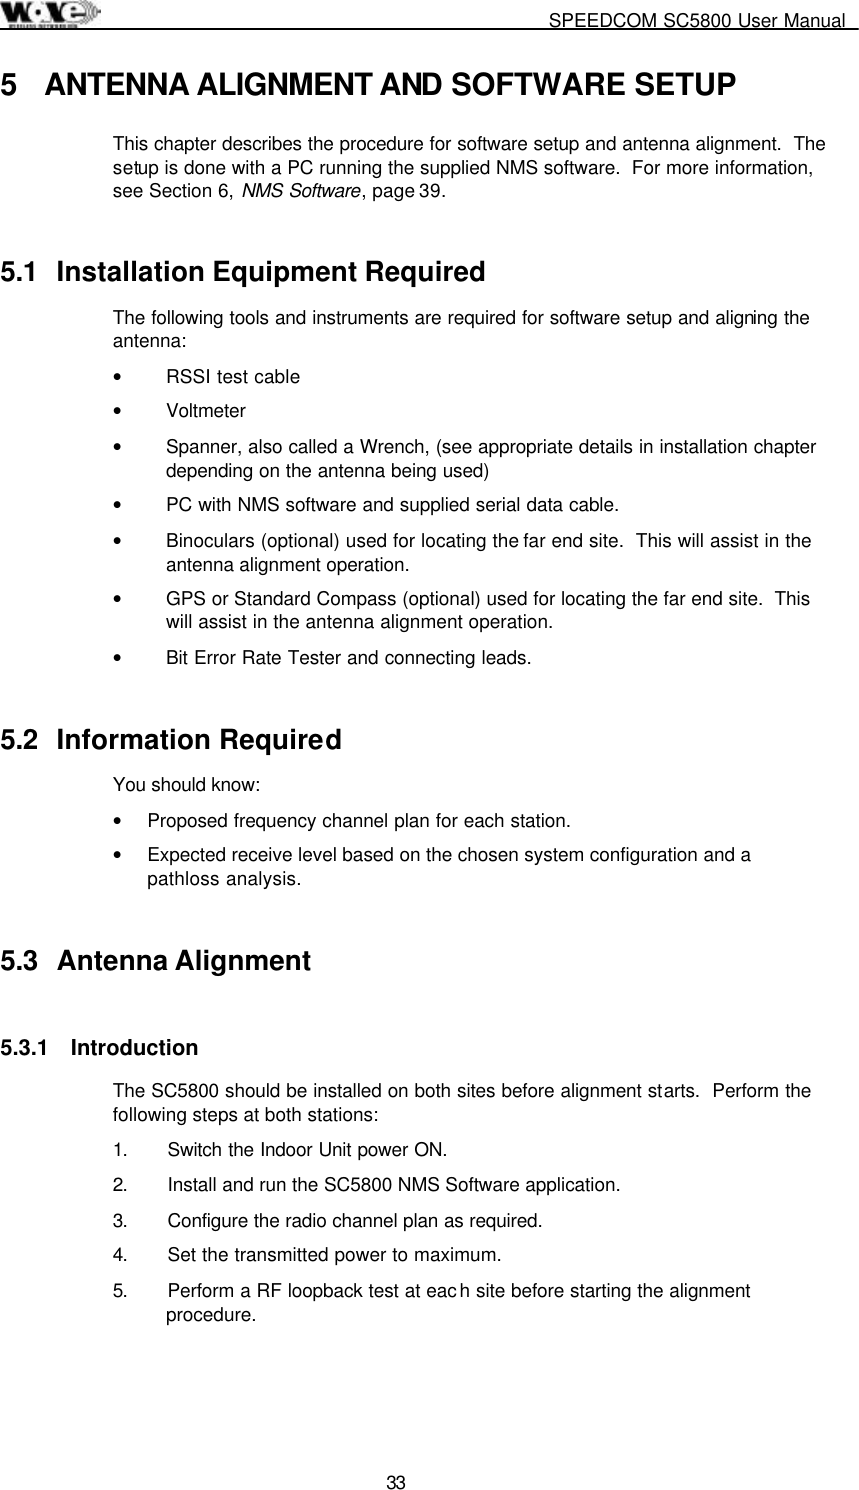     SPEEDCOM SC5800 User Manual  33 5  ANTENNA ALIGNMENT AND SOFTWARE SETUP This chapter describes the procedure for software setup and antenna alignment.  The setup is done with a PC running the supplied NMS software.  For more information, see Section 6, NMS Software, page 39. 5.1  Installation Equipment Required The following tools and instruments are required for software setup and aligning the antenna: •  RSSI test cable •  Voltmeter •  Spanner, also called a Wrench, (see appropriate details in installation chapter depending on the antenna being used) •  PC with NMS software and supplied serial data cable. •  Binoculars (optional) used for locating the far end site.  This will assist in the antenna alignment operation. •  GPS or Standard Compass (optional) used for locating the far end site.  This will assist in the antenna alignment operation. •  Bit Error Rate Tester and connecting leads. 5.2 Information Required You should know: •  Proposed frequency channel plan for each station.   •  Expected receive level based on the chosen system configuration and a pathloss analysis. 5.3 Antenna Alignment 5.3.1 Introduction The SC5800 should be installed on both sites before alignment starts.  Perform the following steps at both stations: 1.  Switch the Indoor Unit power ON. 2.  Install and run the SC5800 NMS Software application. 3.  Configure the radio channel plan as required. 4.  Set the transmitted power to maximum. 5.  Perform a RF loopback test at eac h site before starting the alignment procedure. 